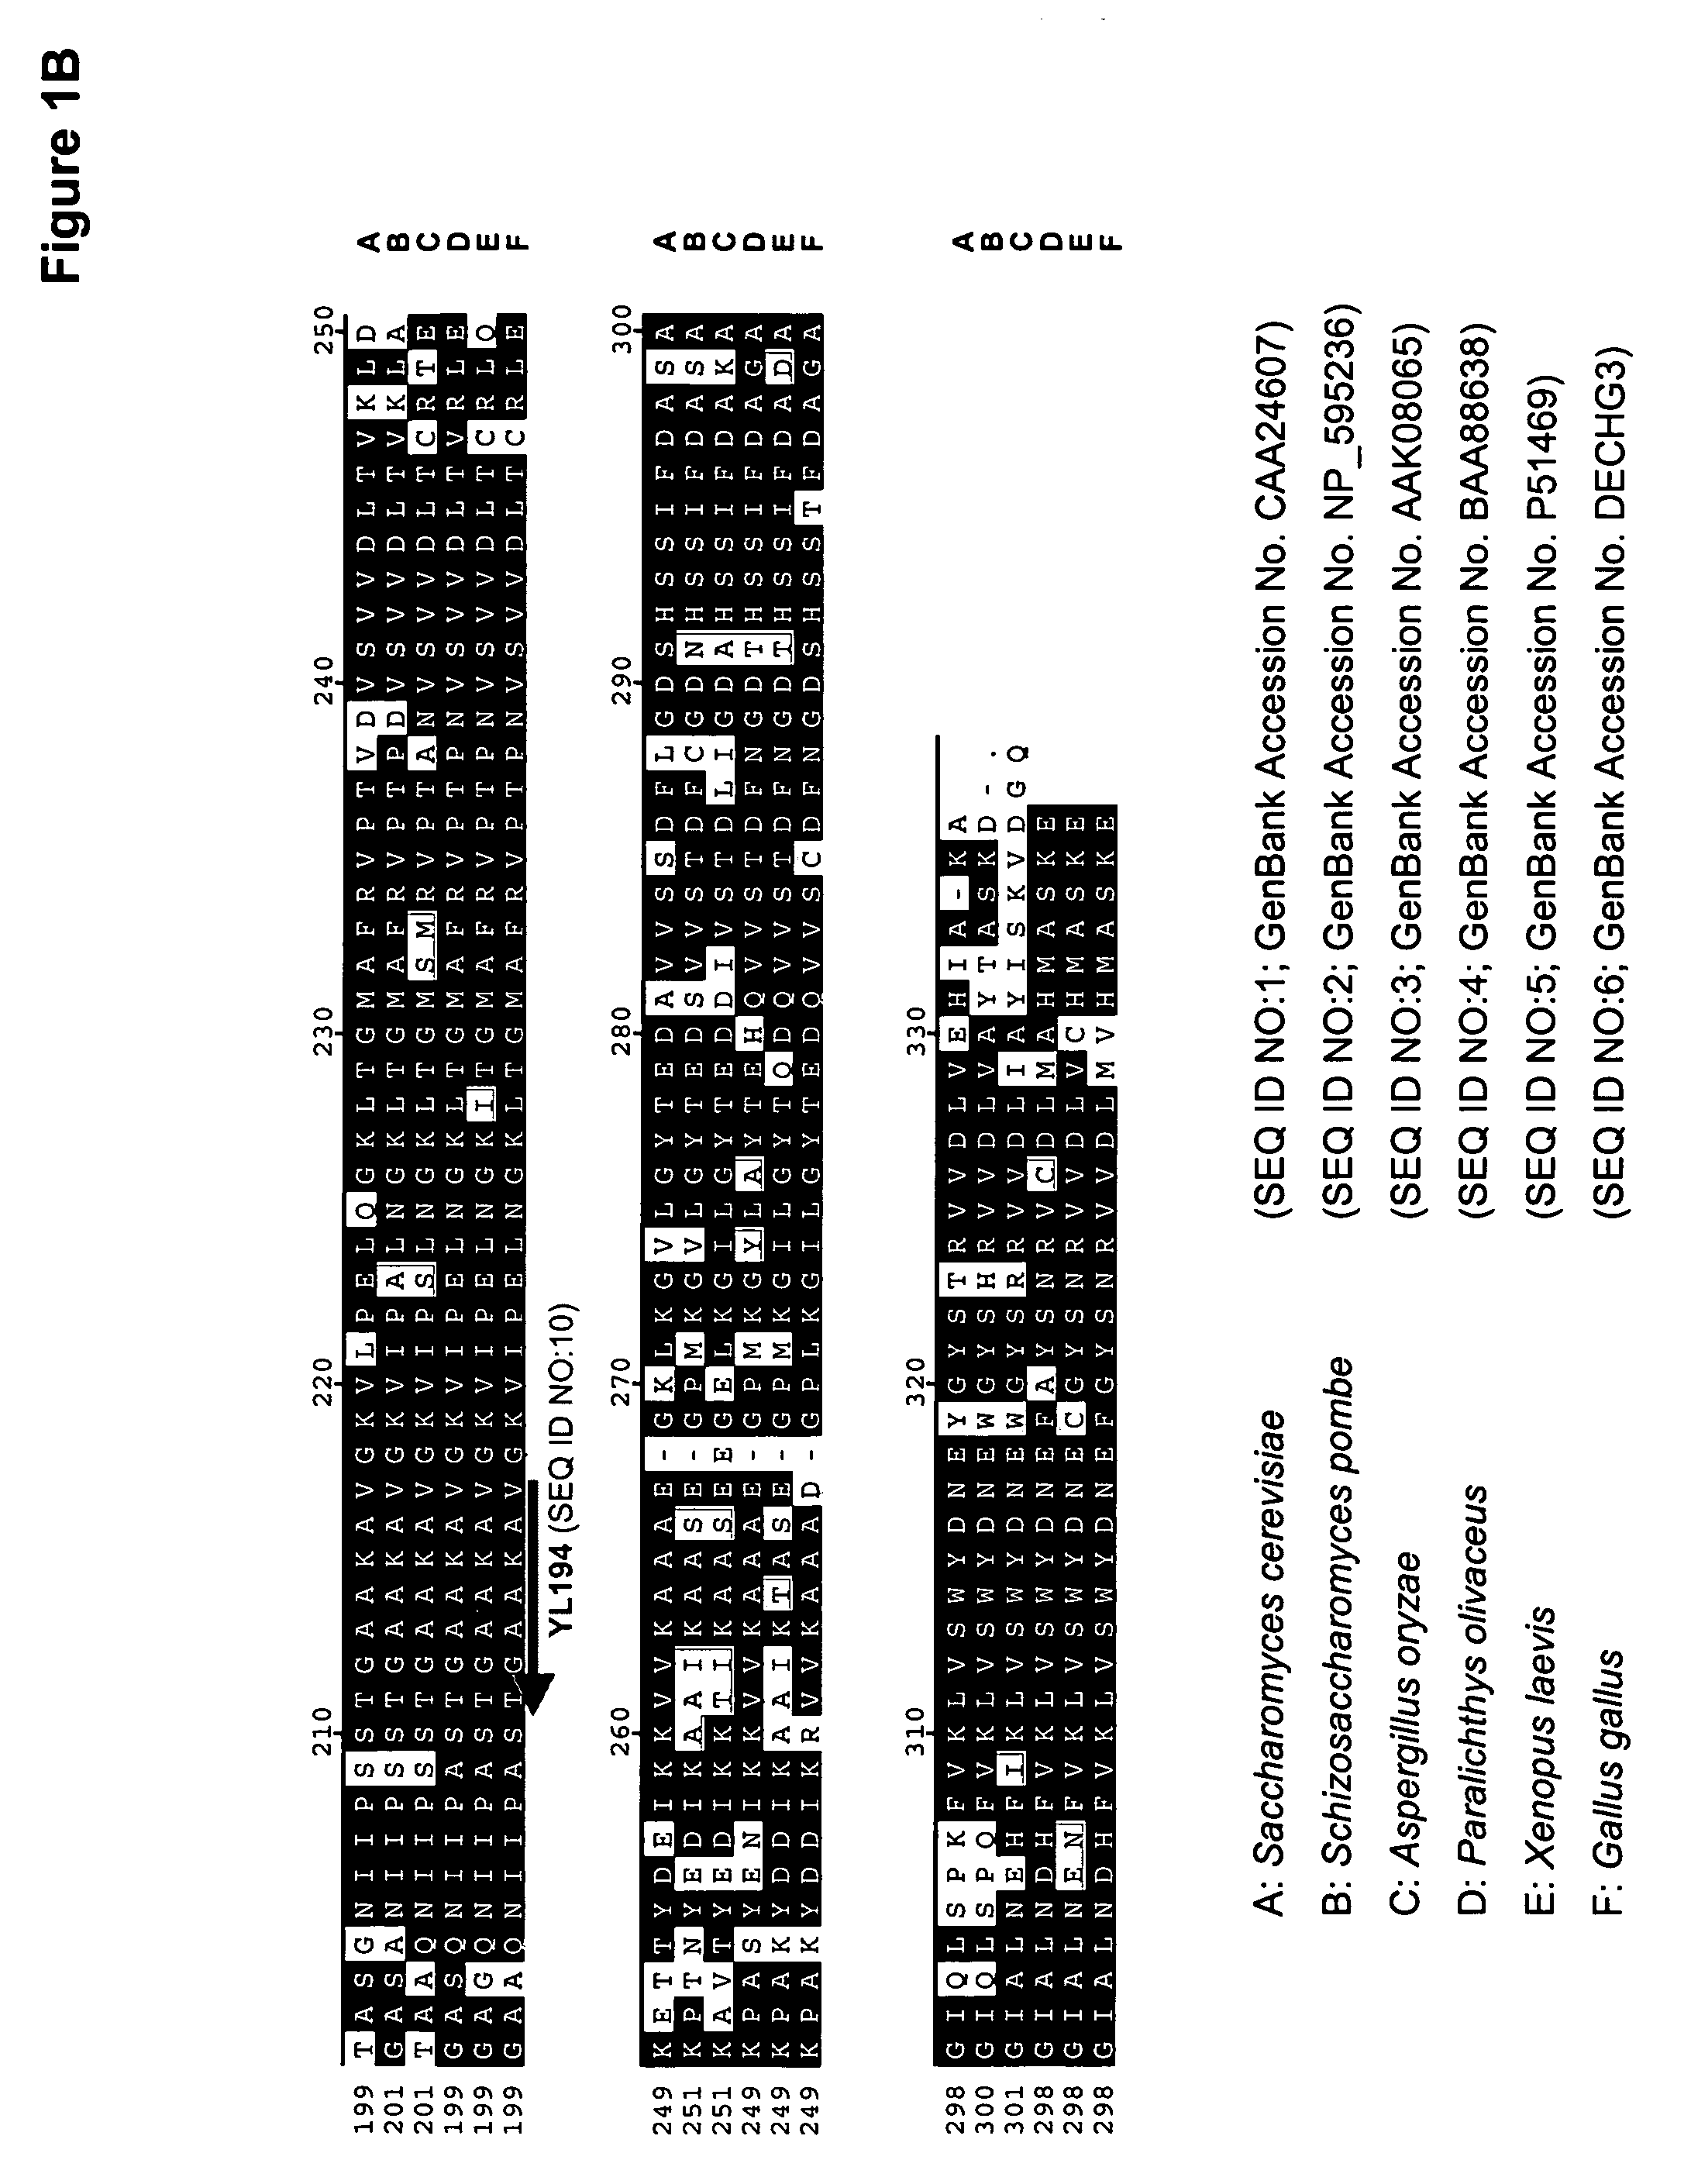 Glyceraldehyde-3-phosphate dehydrogenase and phosphoglycerate mutase regulatory sequences for gene expression in oleaginous yeast